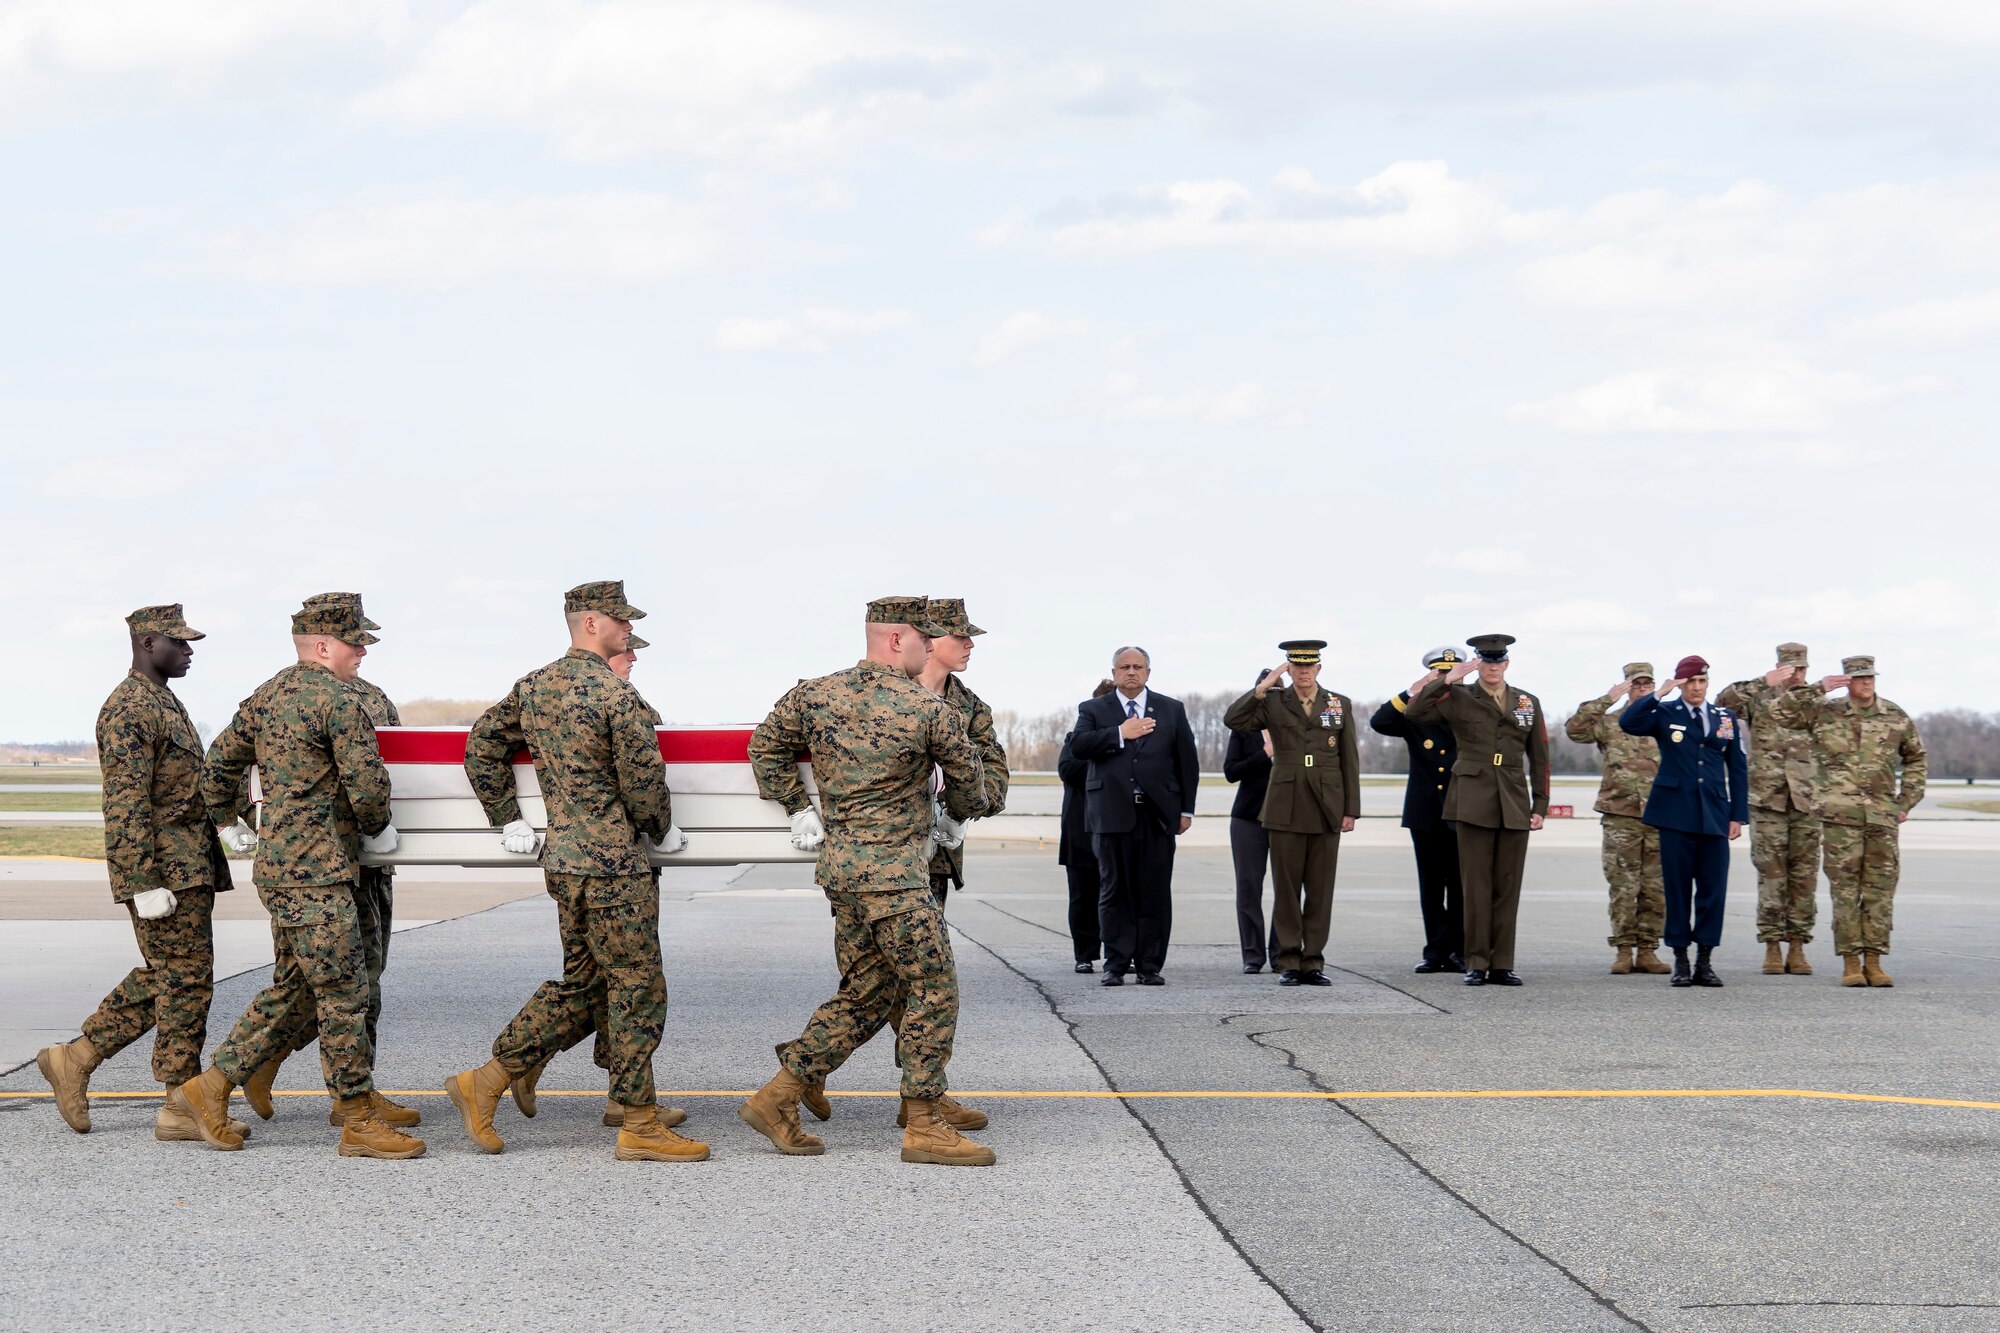 Marine Capt. Matthew J. Tomkiewicz honored in dignified transfer March 25